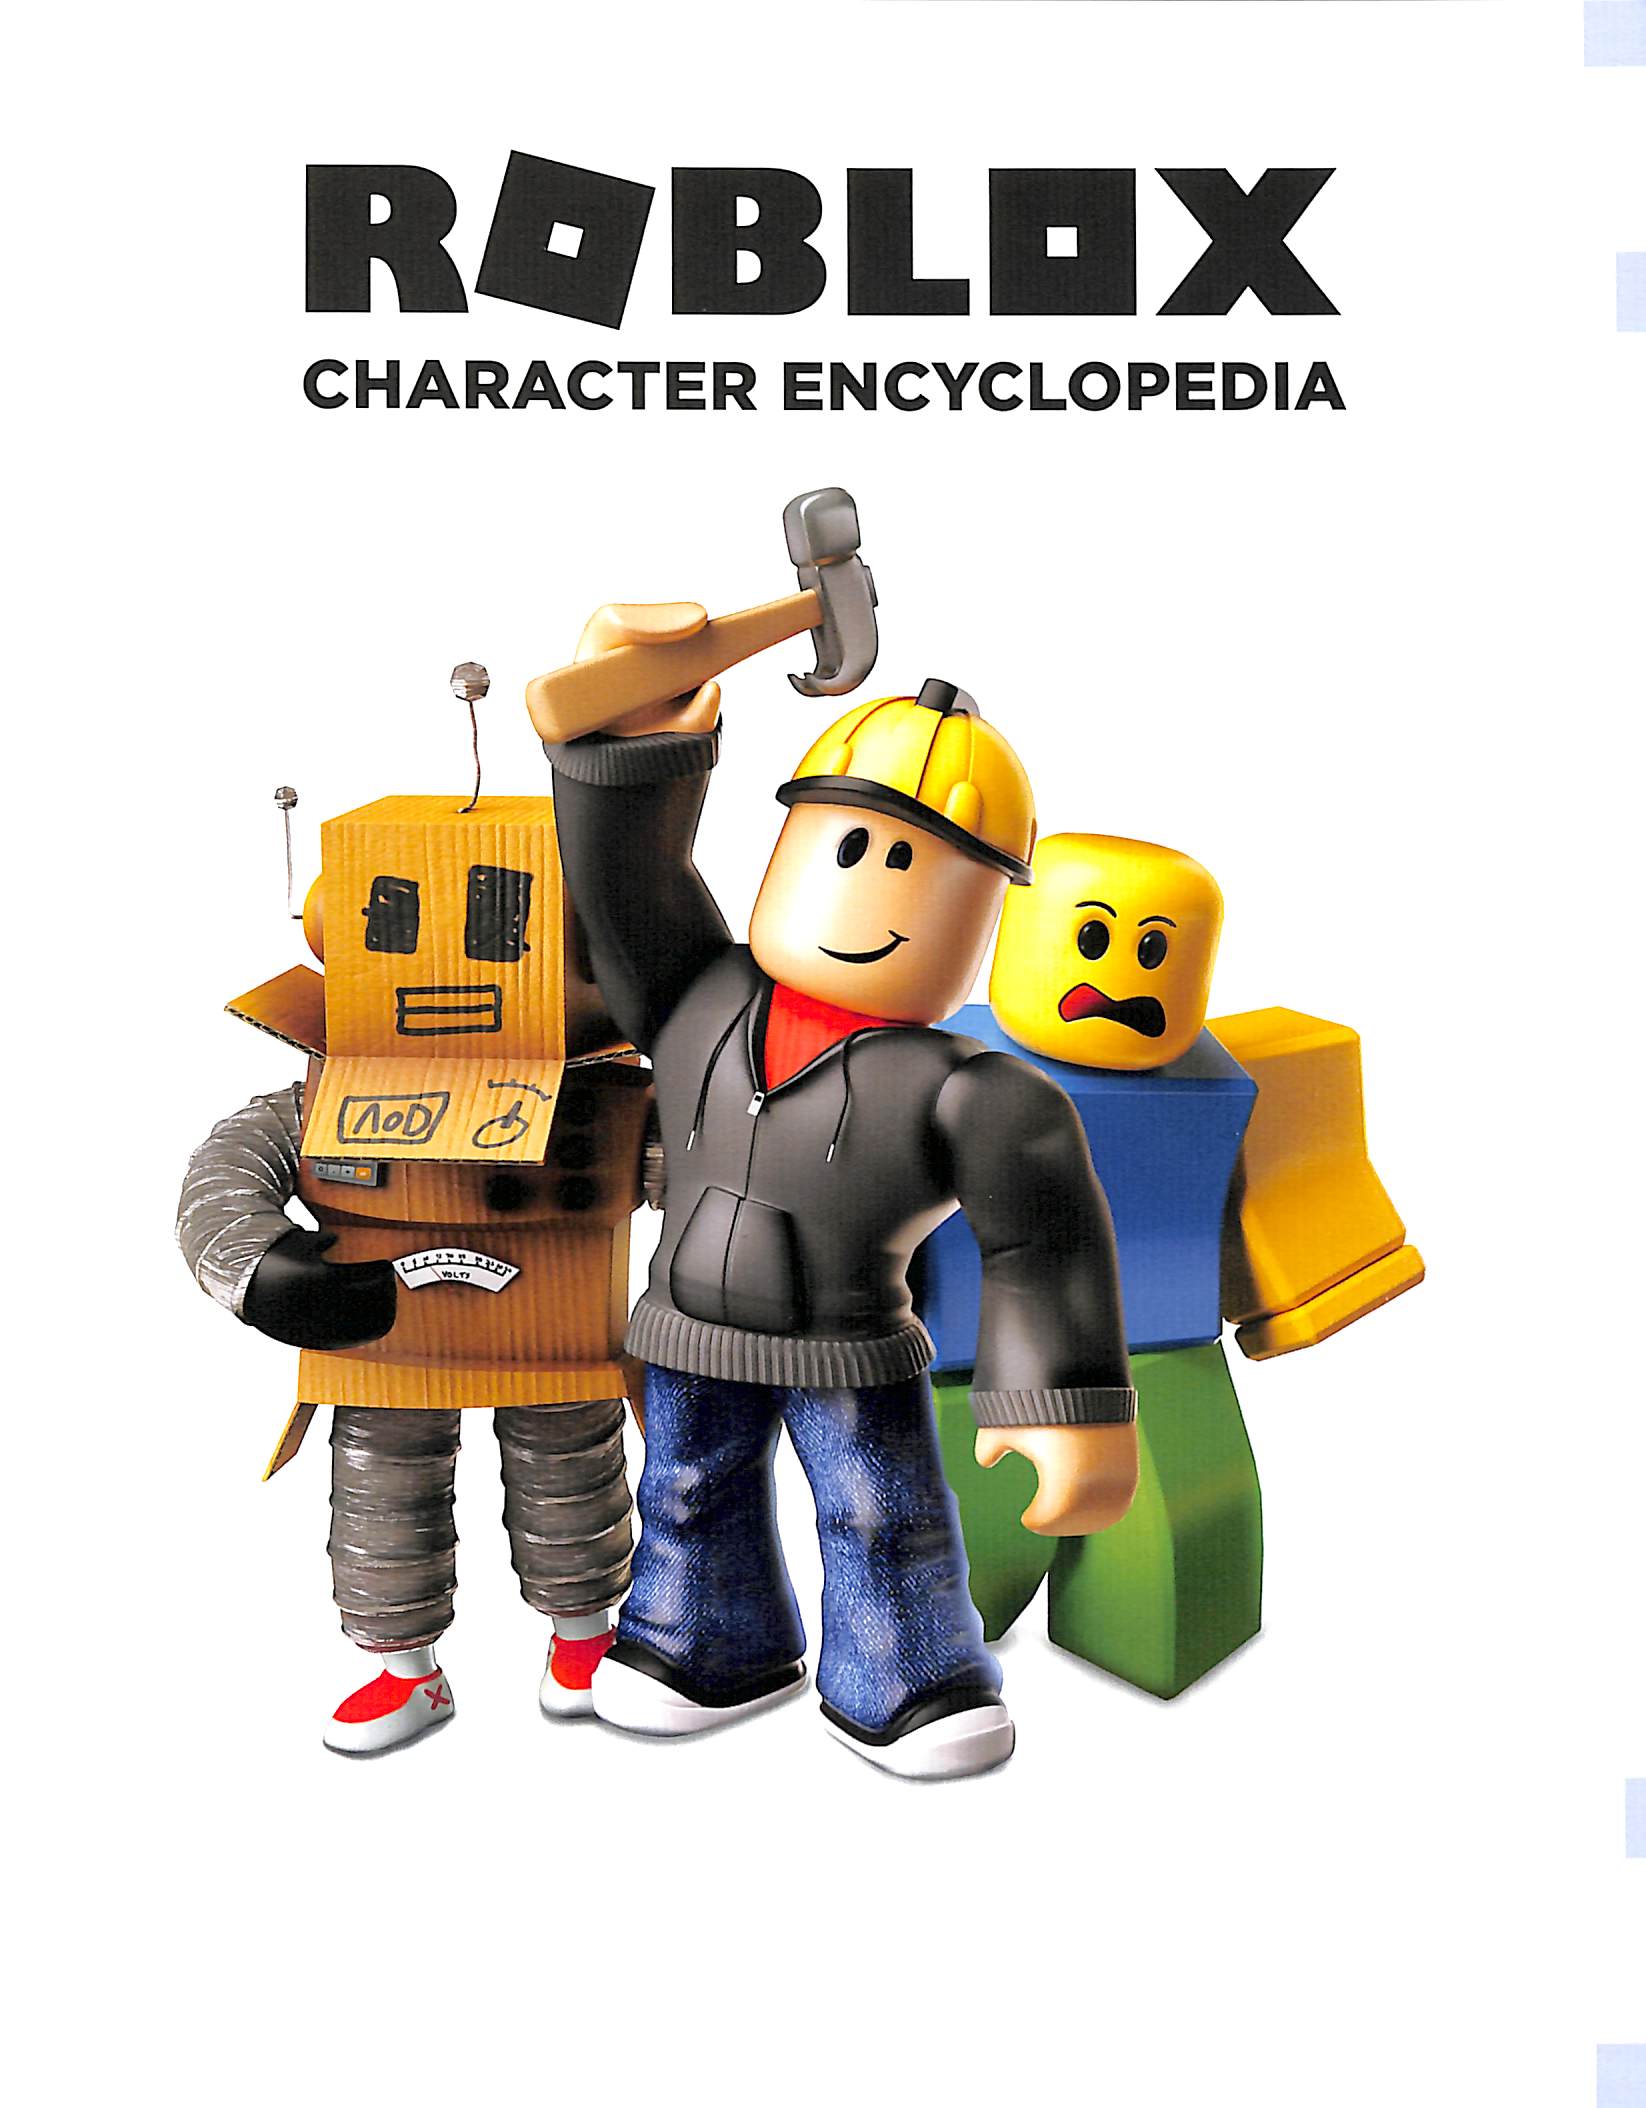 Roblox Character Encyclopedia By Egmont Publishing Uk 9781405297424 Brownsbfs - roblox character encyclopedia characters